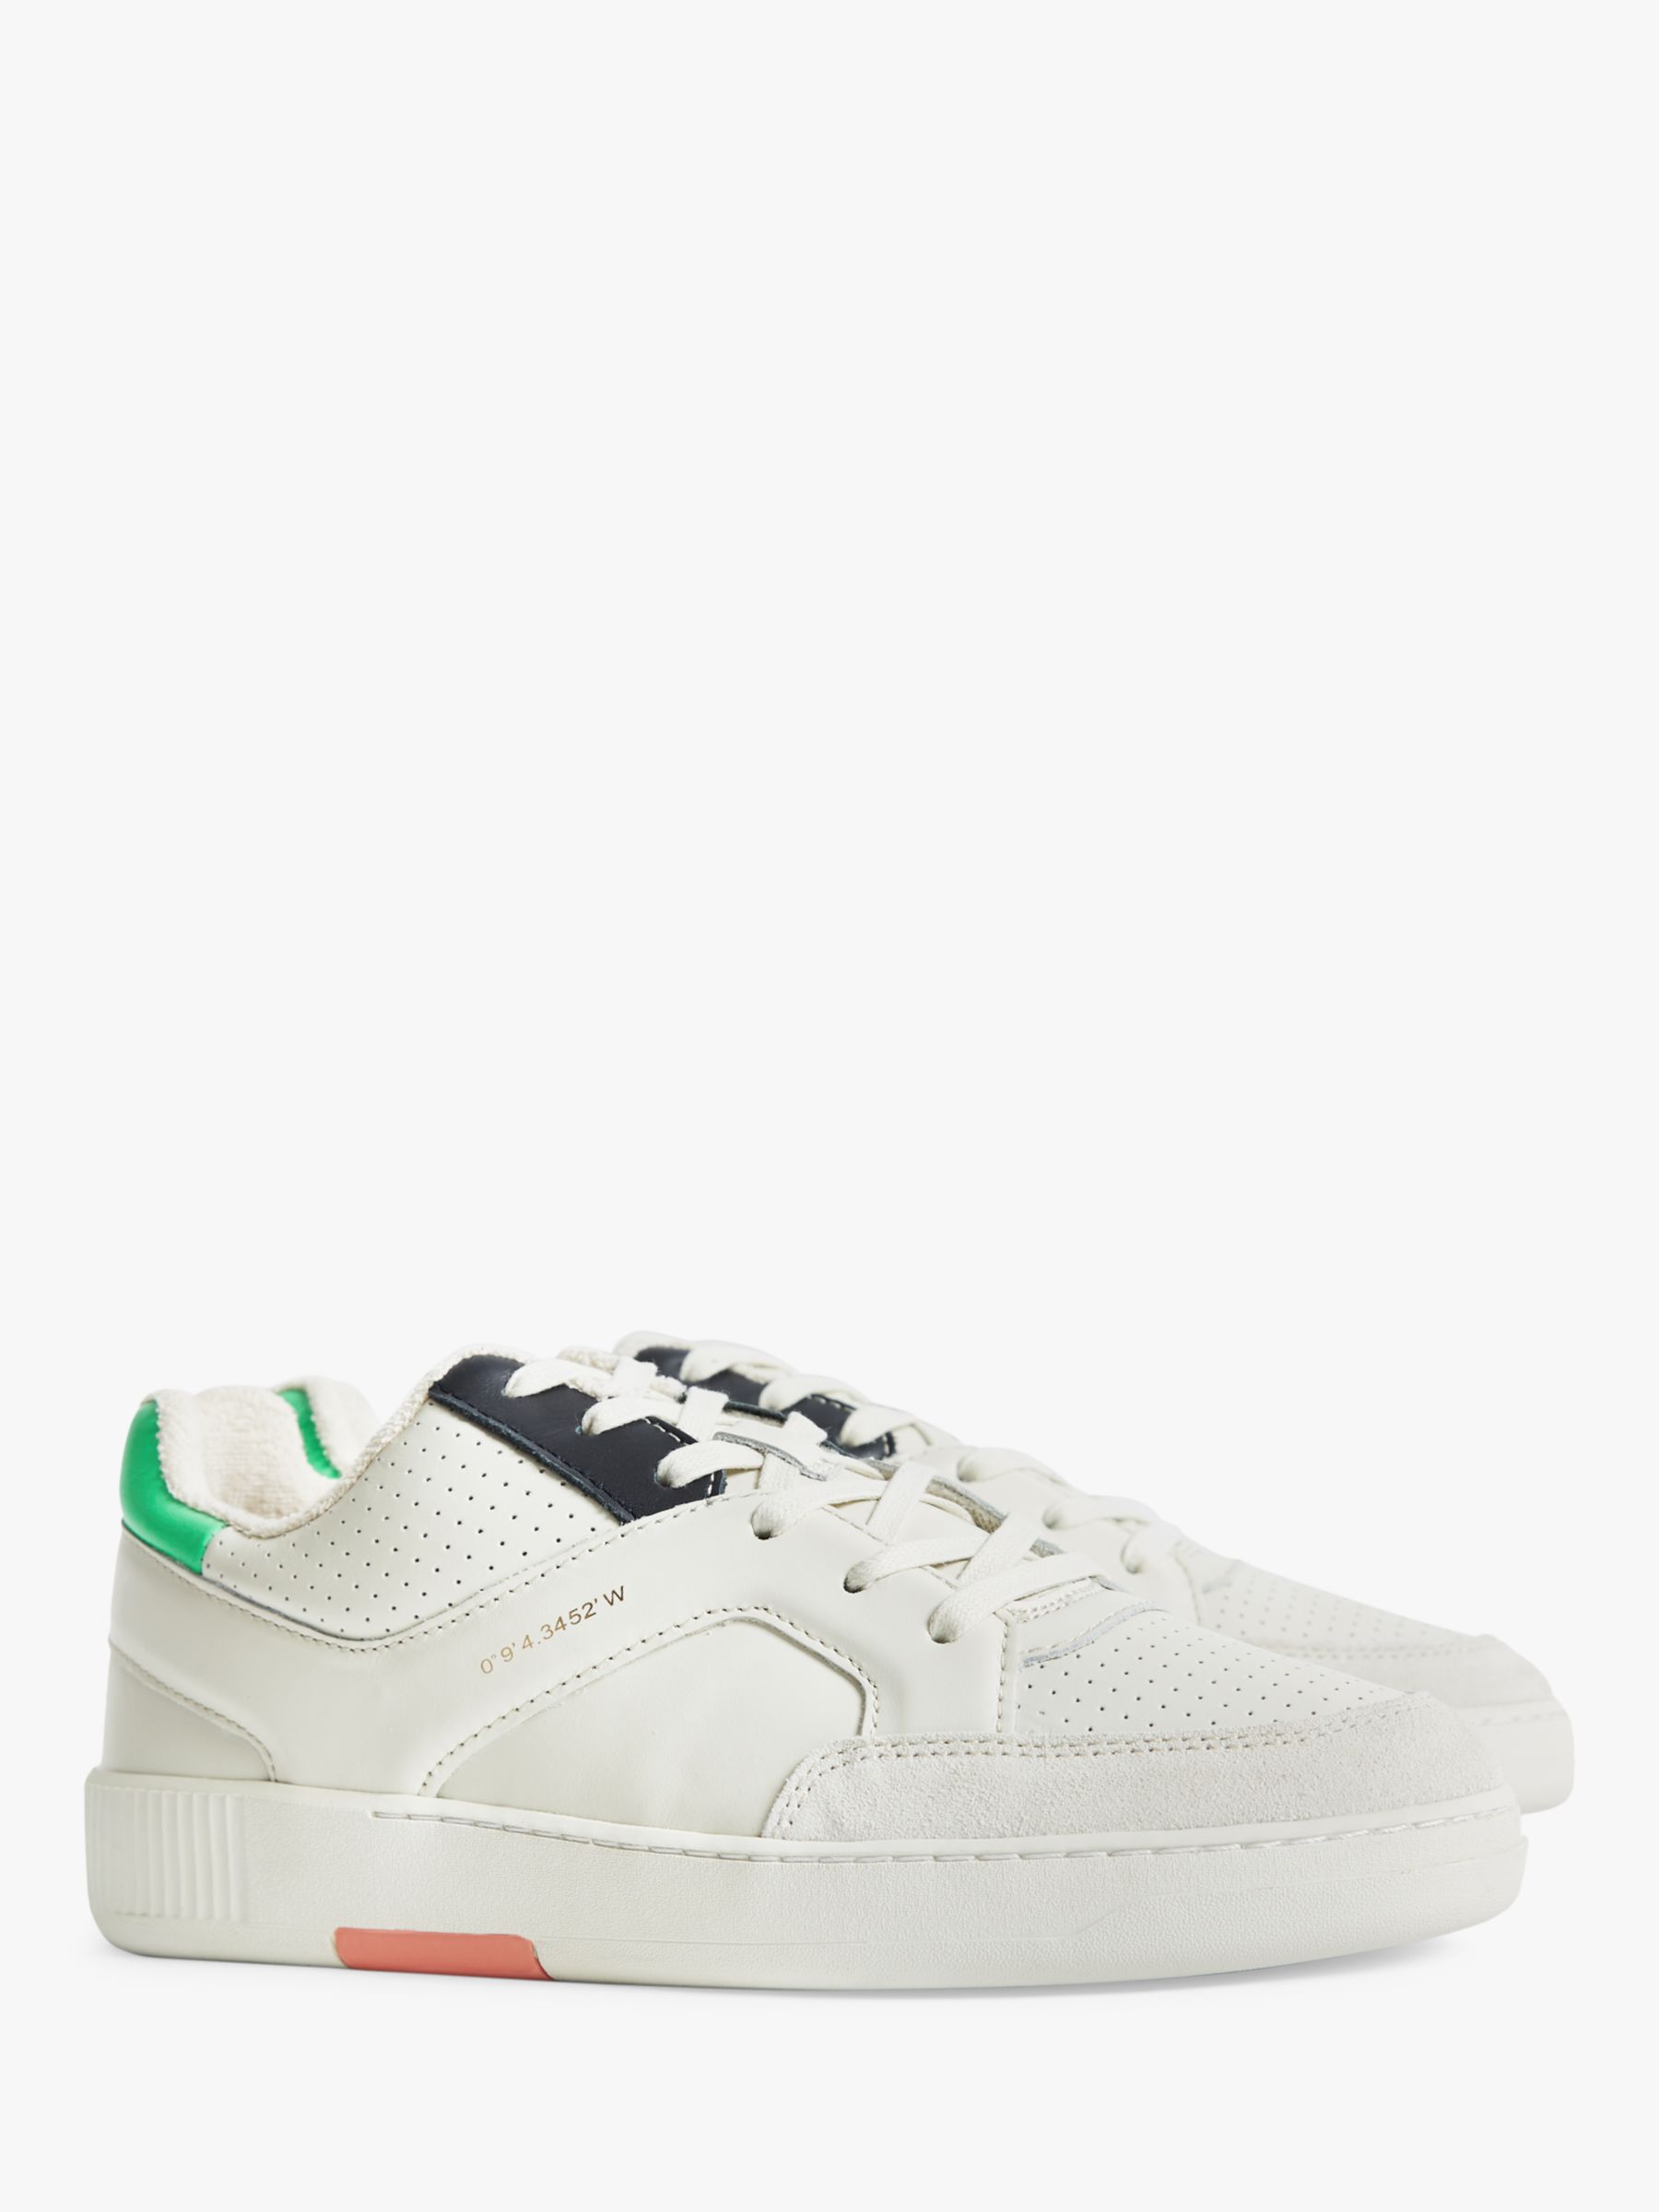 Reiss Grendon Leather Perforated Trainers, White/Multi